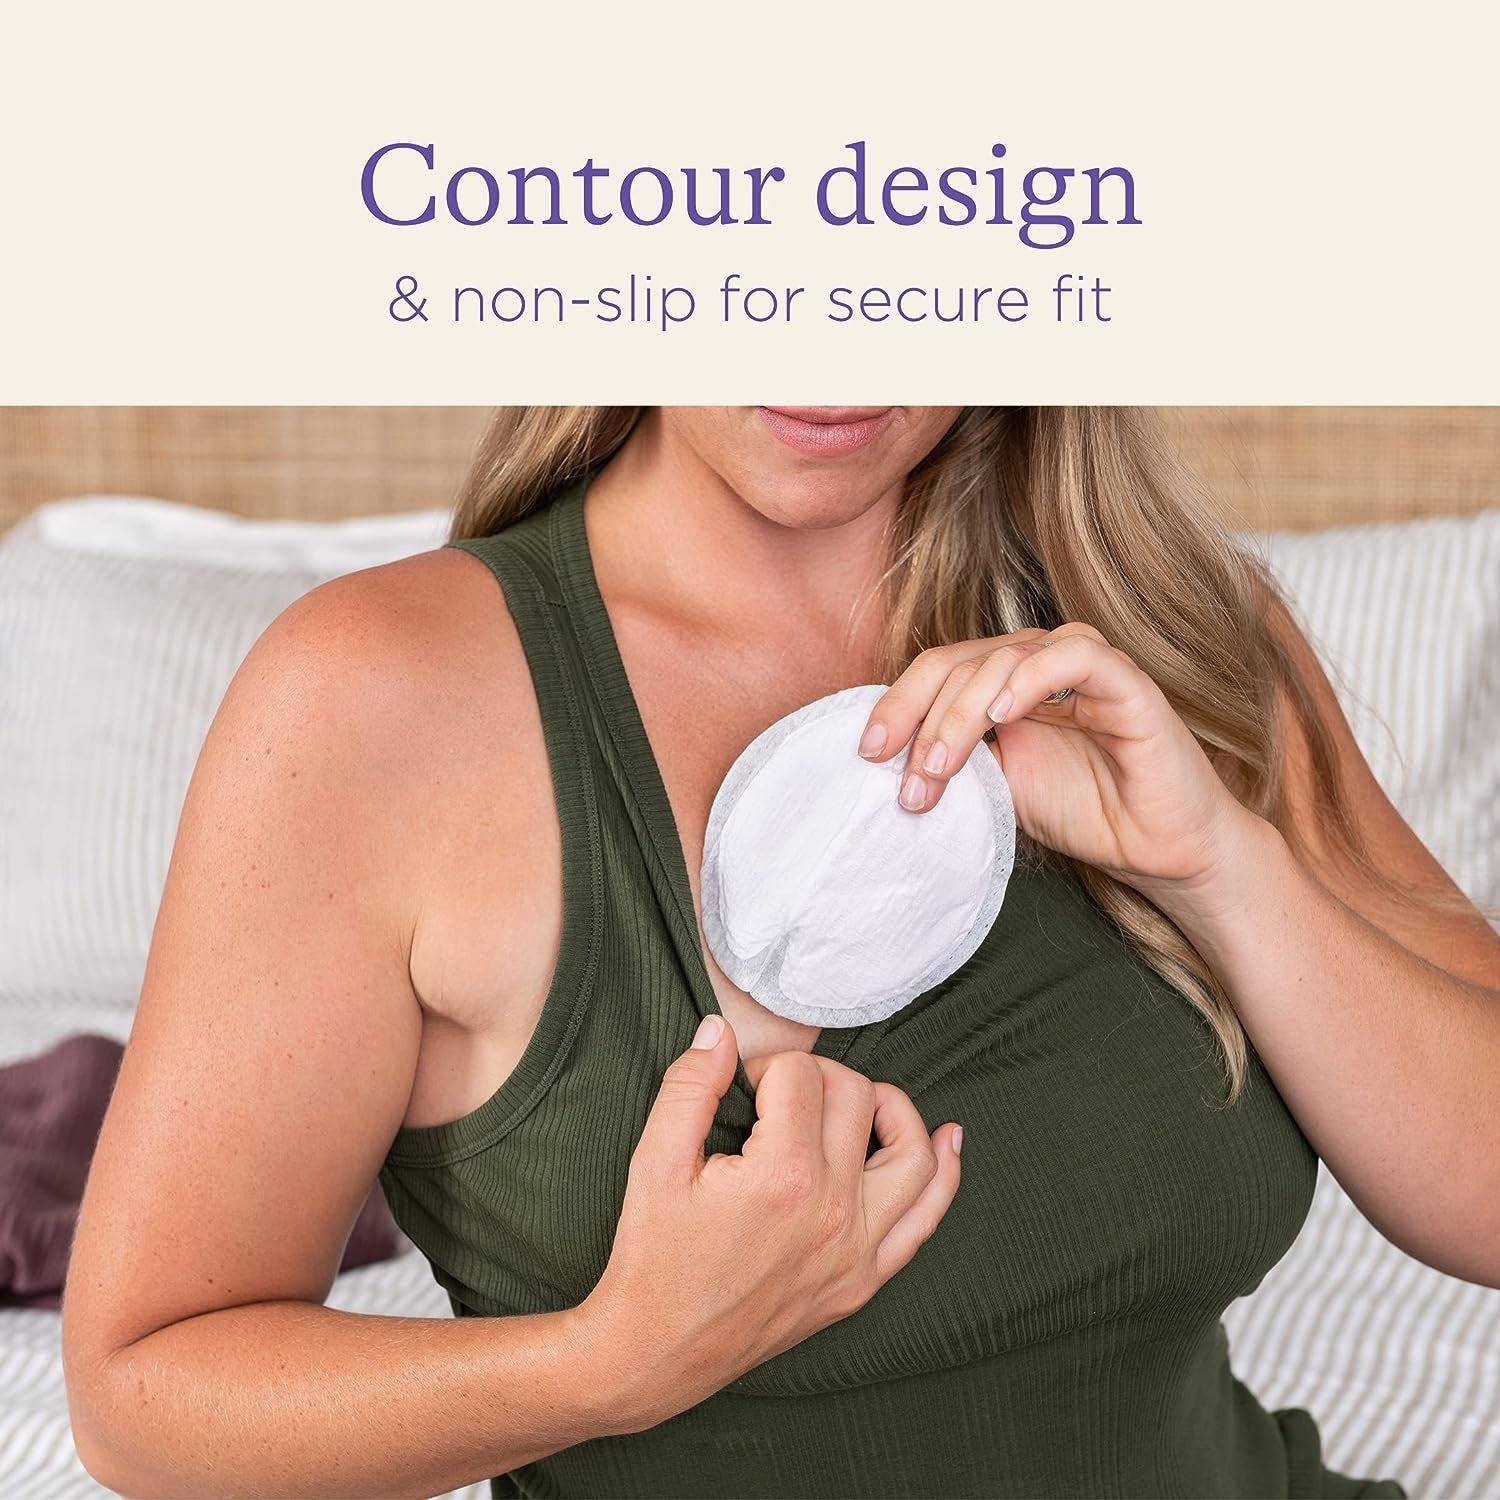 Lansinoh Disposable Breast Pads for nursing breastfeeding mothers